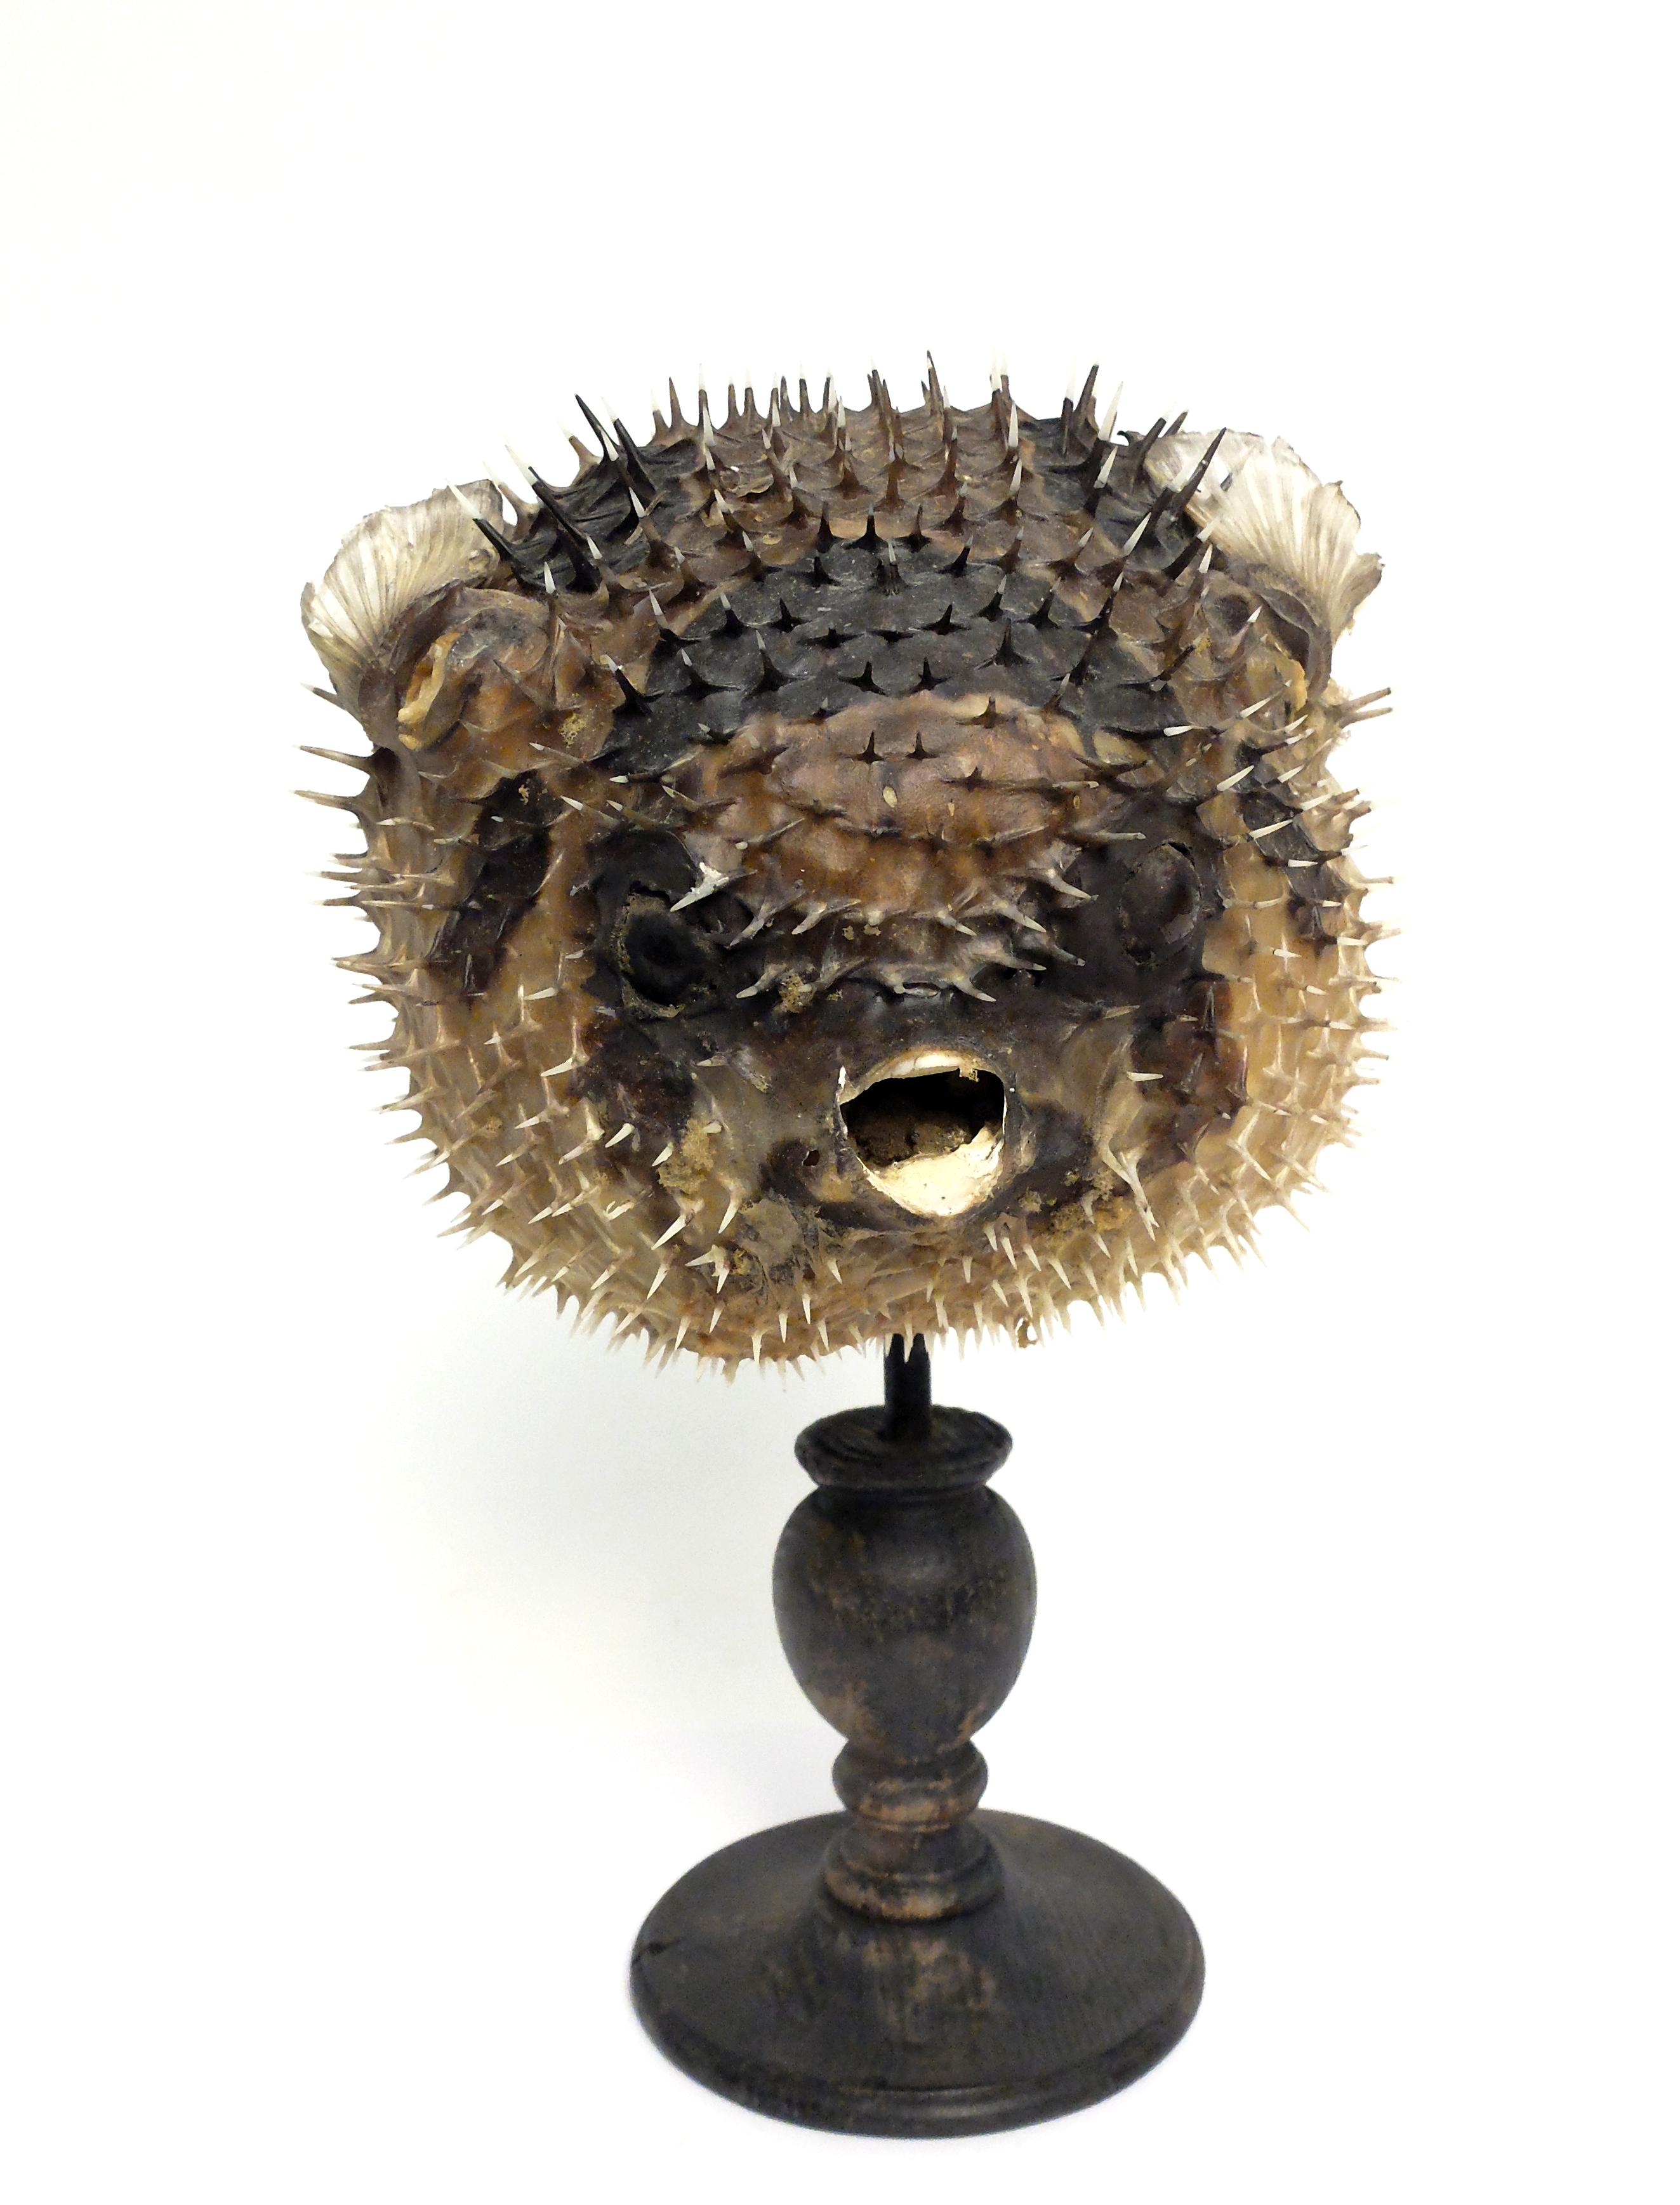 19th Century Wunderkammer Marine Natural Taxodermie Specimen of a Porcupine Fish 1